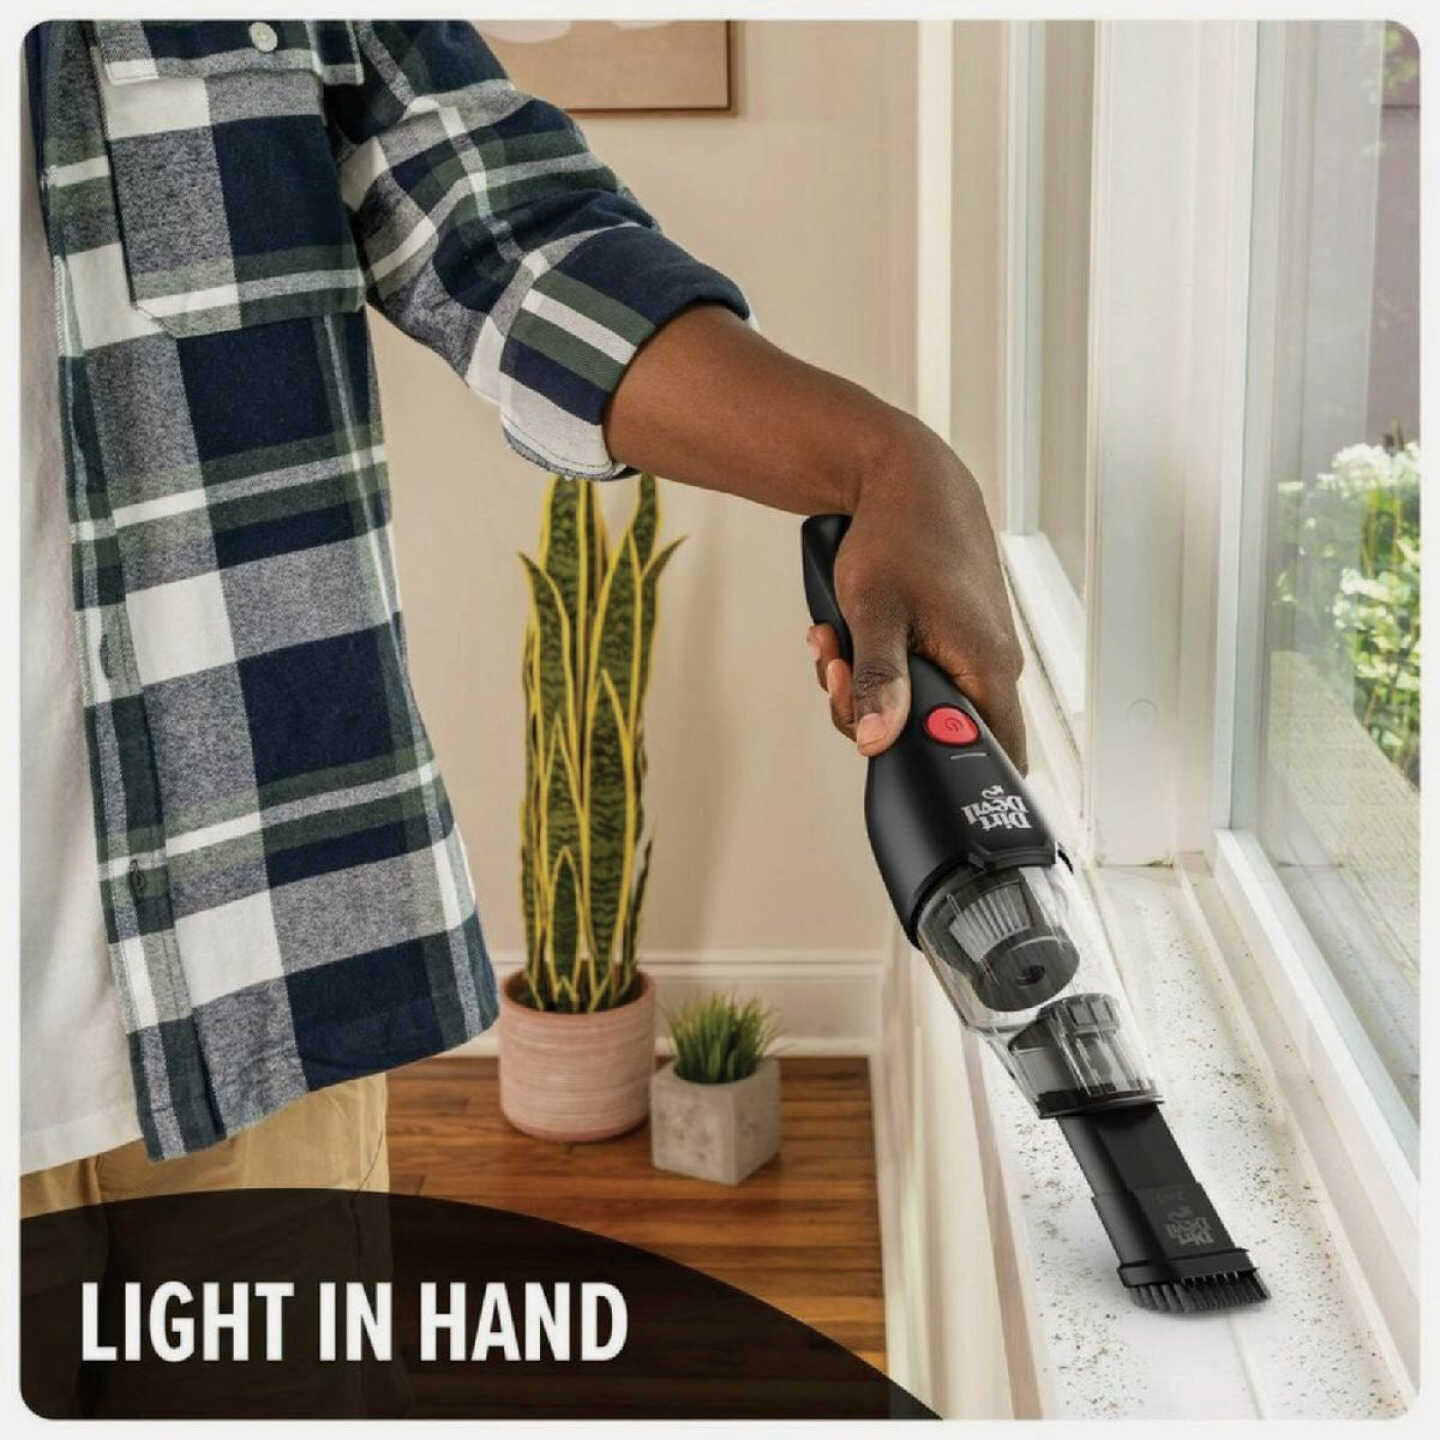 Black & Decker Dustbuster 10.8V Brushed Lithium-Ion Cordless Hand